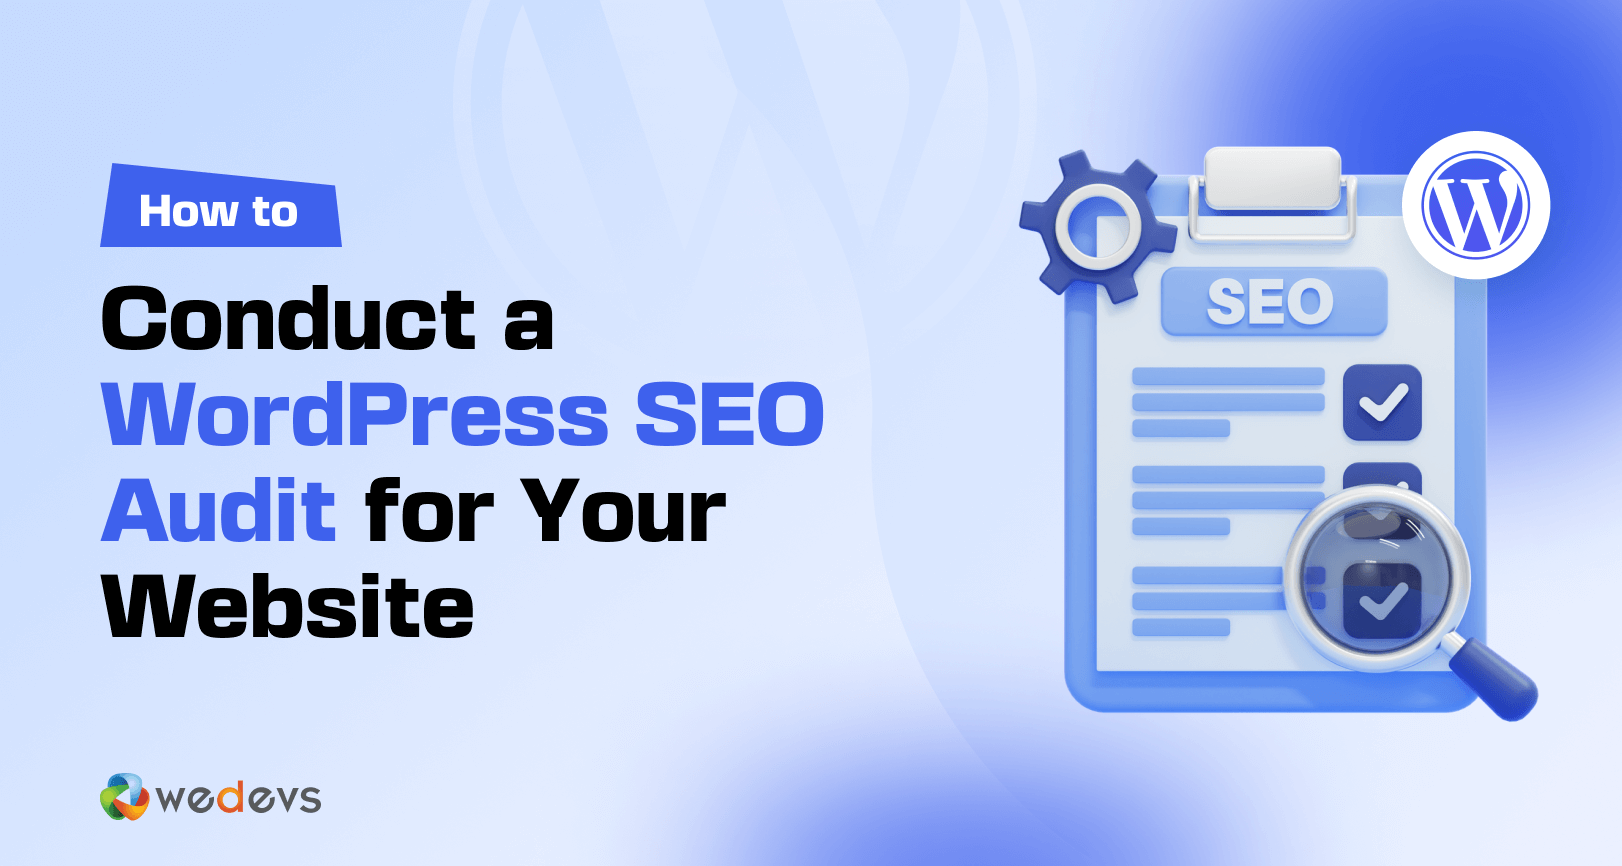 How To Conduct a WordPress SEO Audit for Your Website